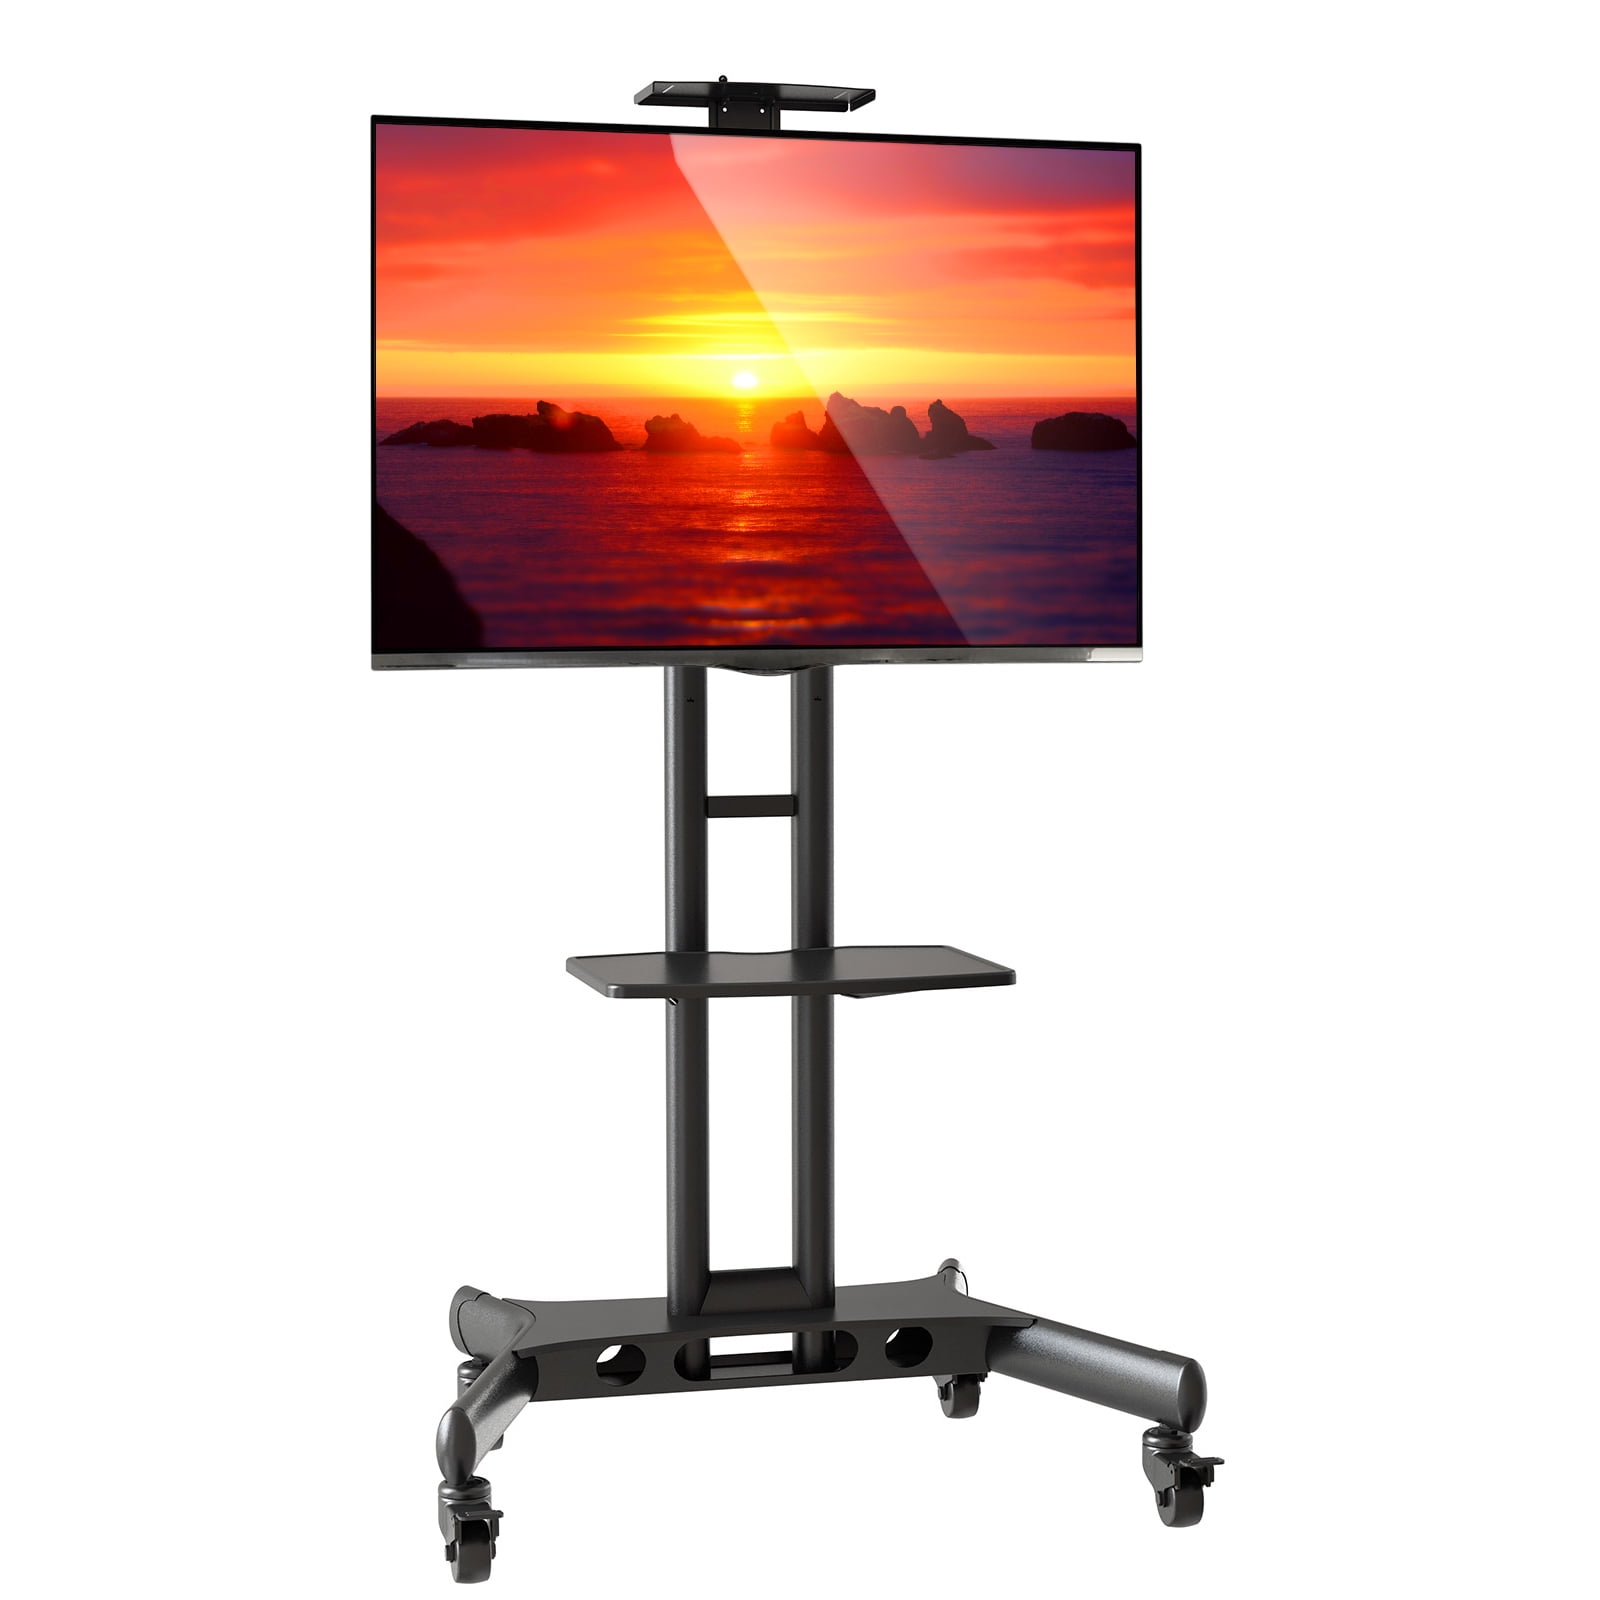 Details about   Mobile TV Stand Rolling Cart with Mount for 37-80 Inch Flat Screen/Curved TVs 